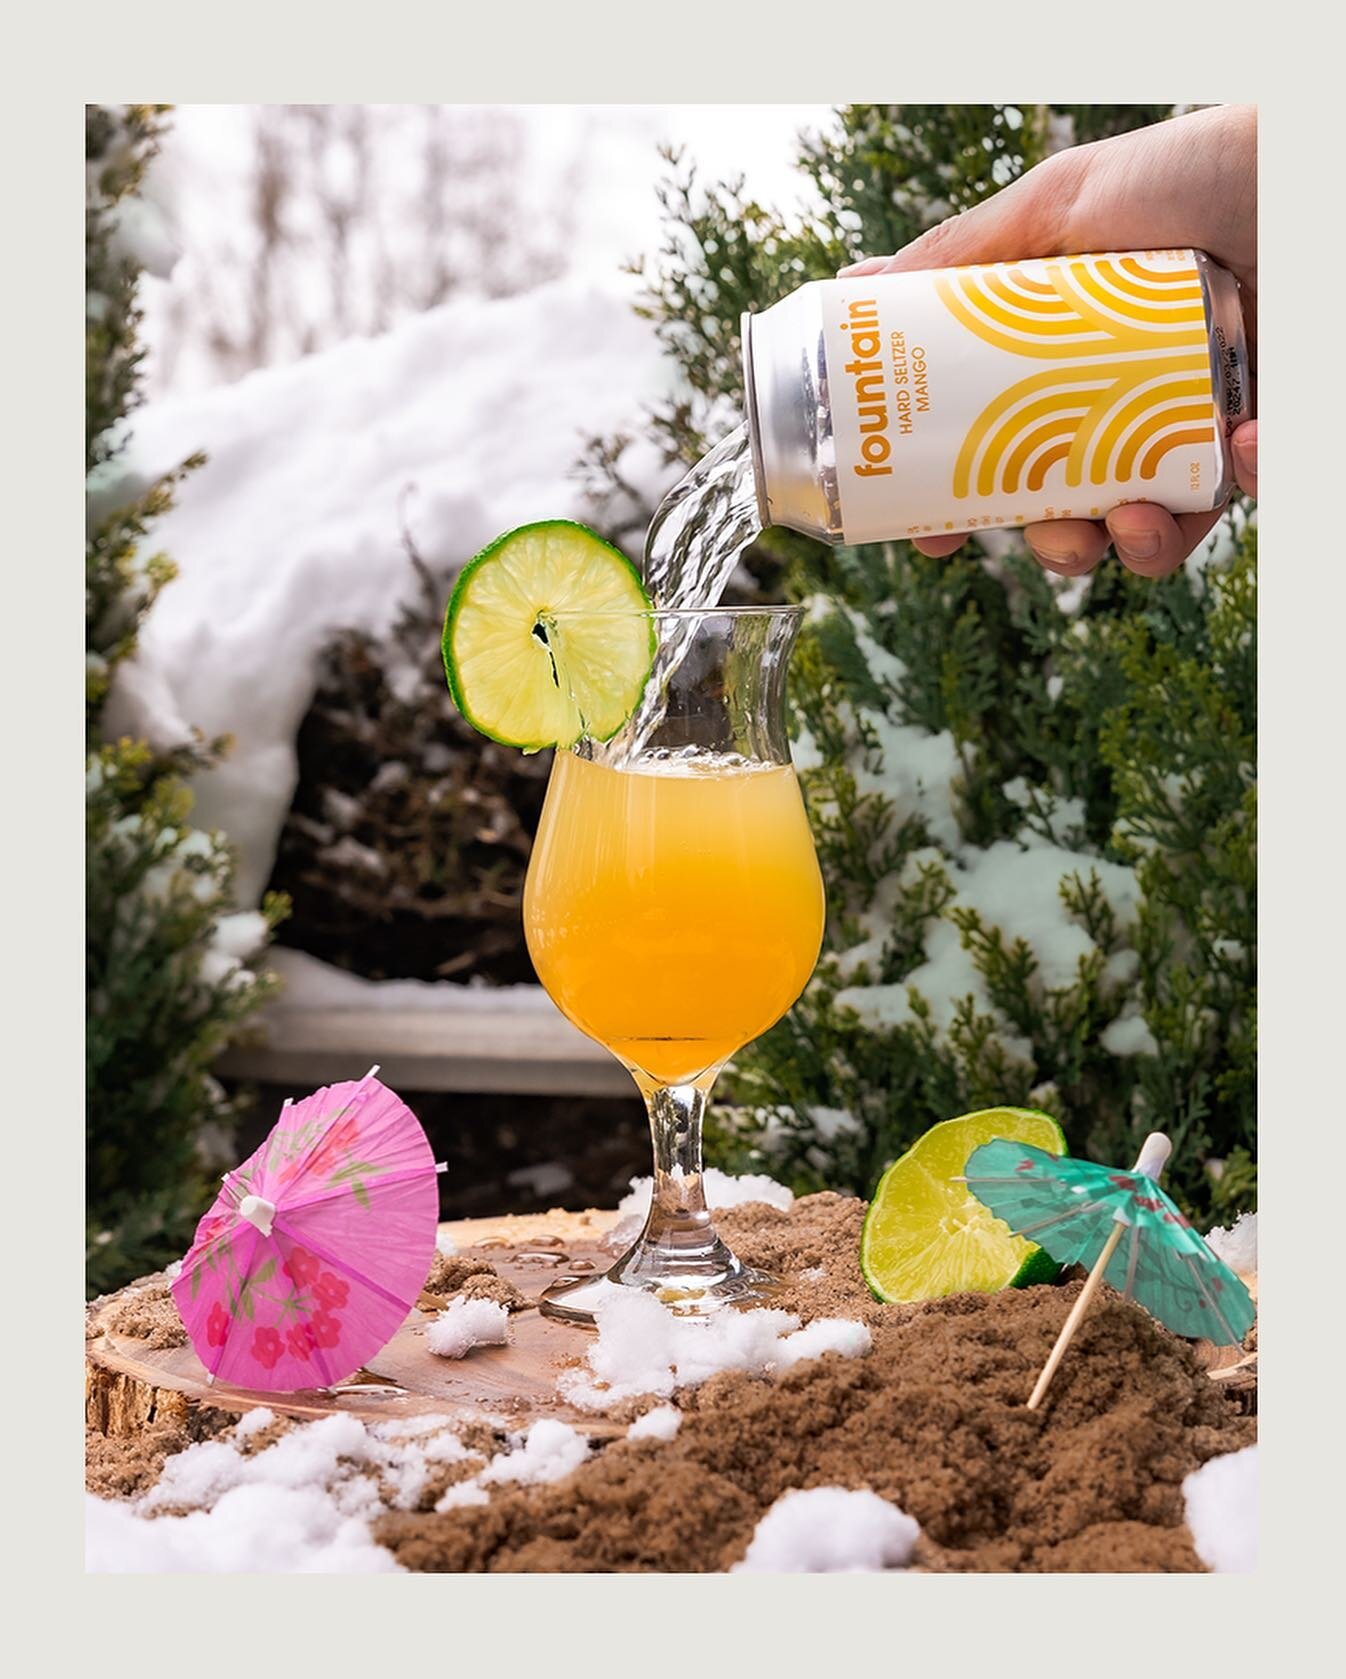 ON ISLAND TIME🍹⛱🏝

2 oz Dry White Rum (Flor de Cana Extra Seco is Recommended)
1 oz Fresh Lime Juice 
.25 oz Cane Sugar Syrup
.25 oz Mango Nectar
.5 oz Fountain Mango

Garnish: Lime Wheel, Thinly Sliced 

Instructions: 
Combine Rum, Lime Juice, Can